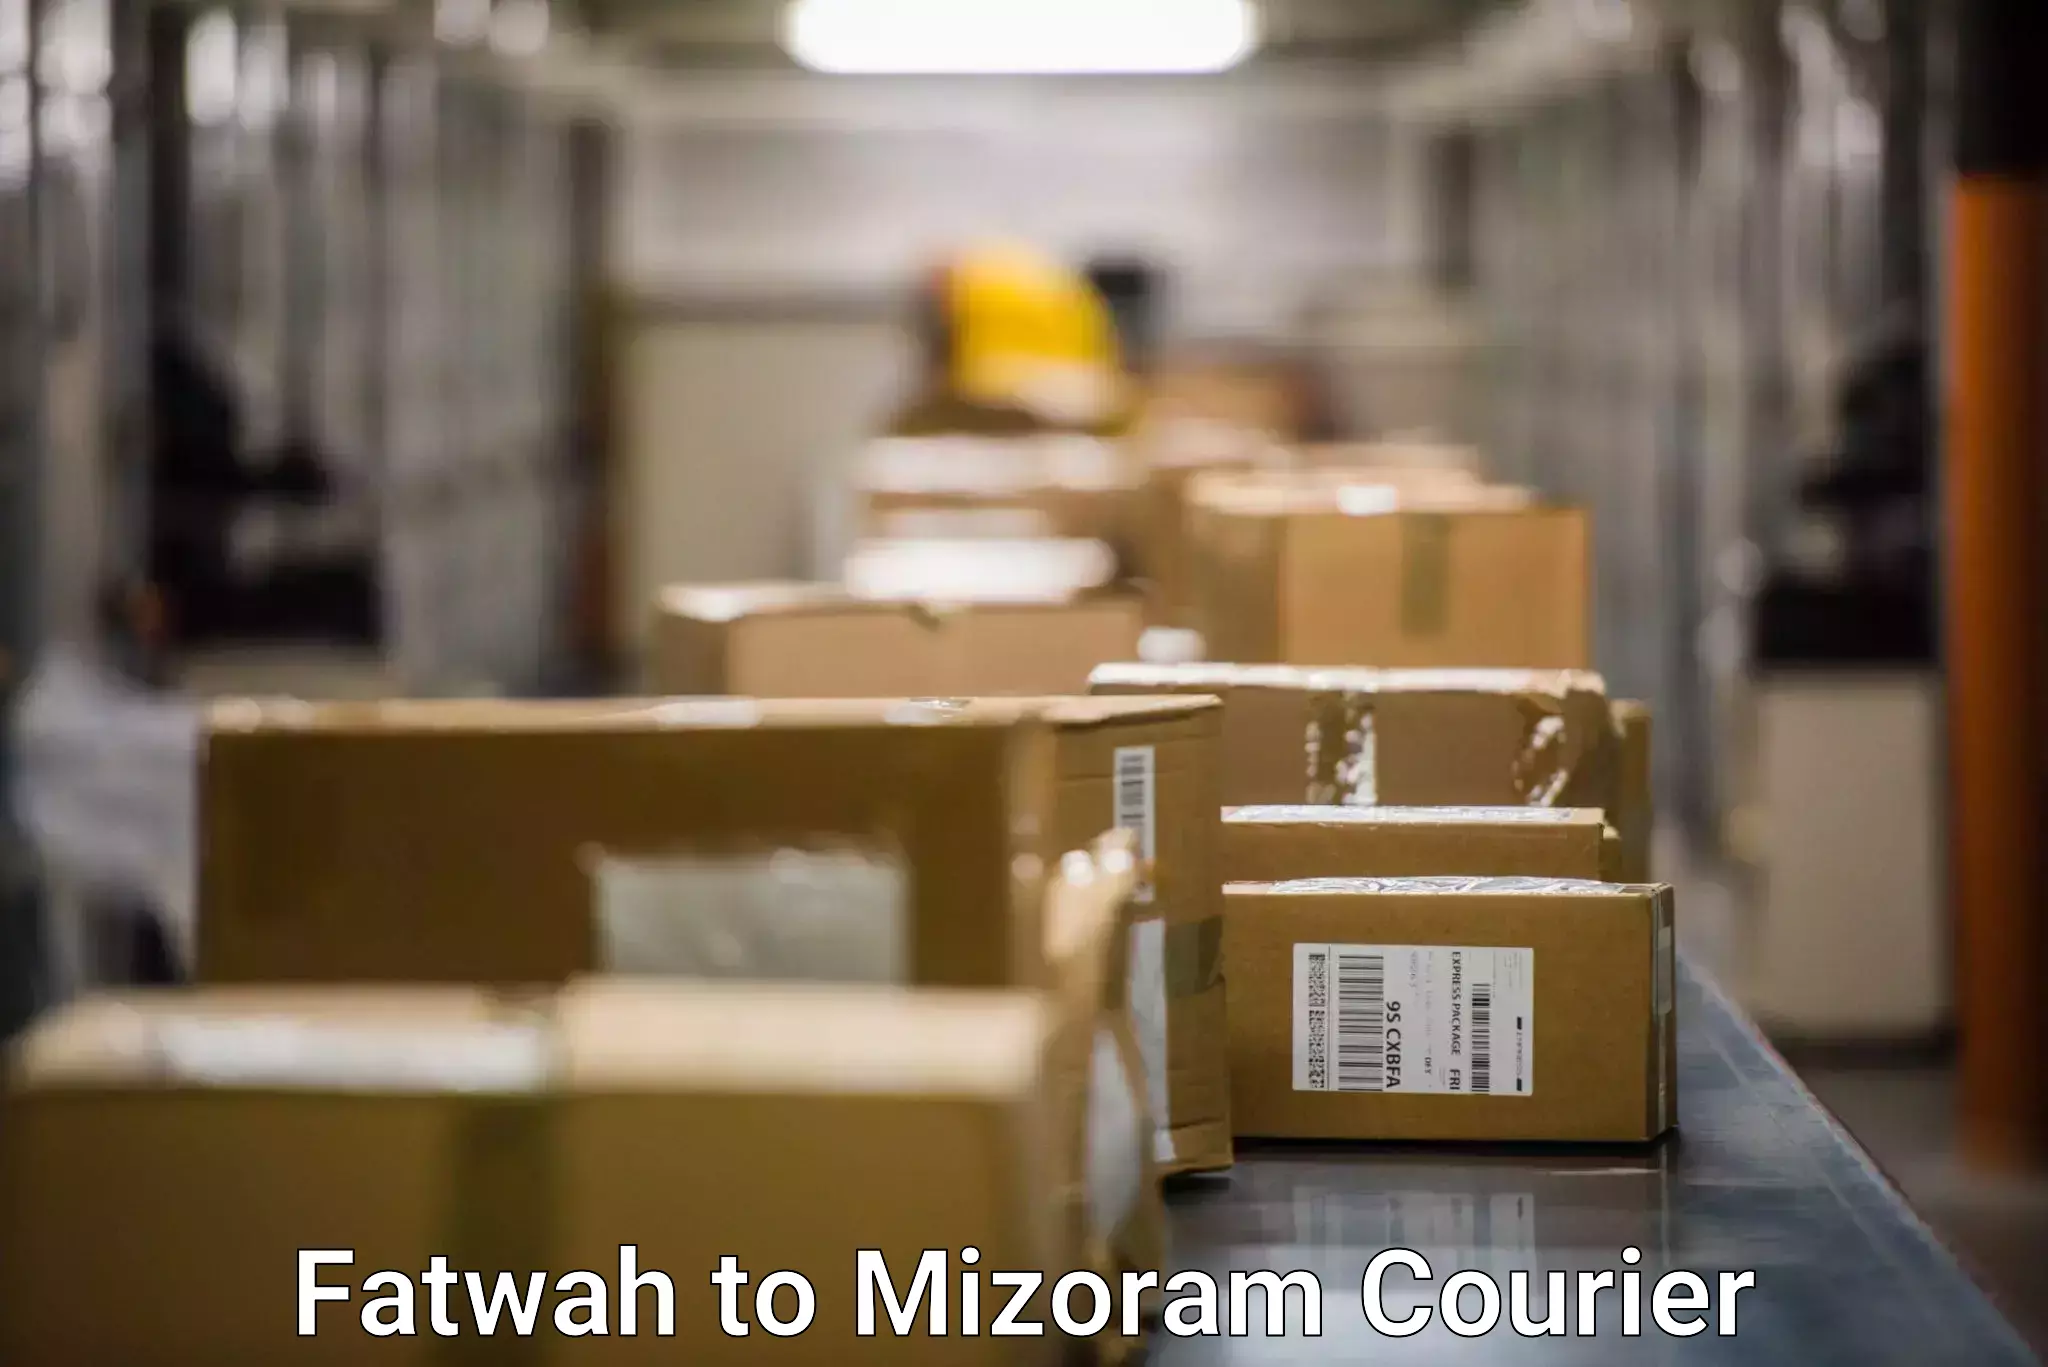 High-speed delivery Fatwah to Darlawn